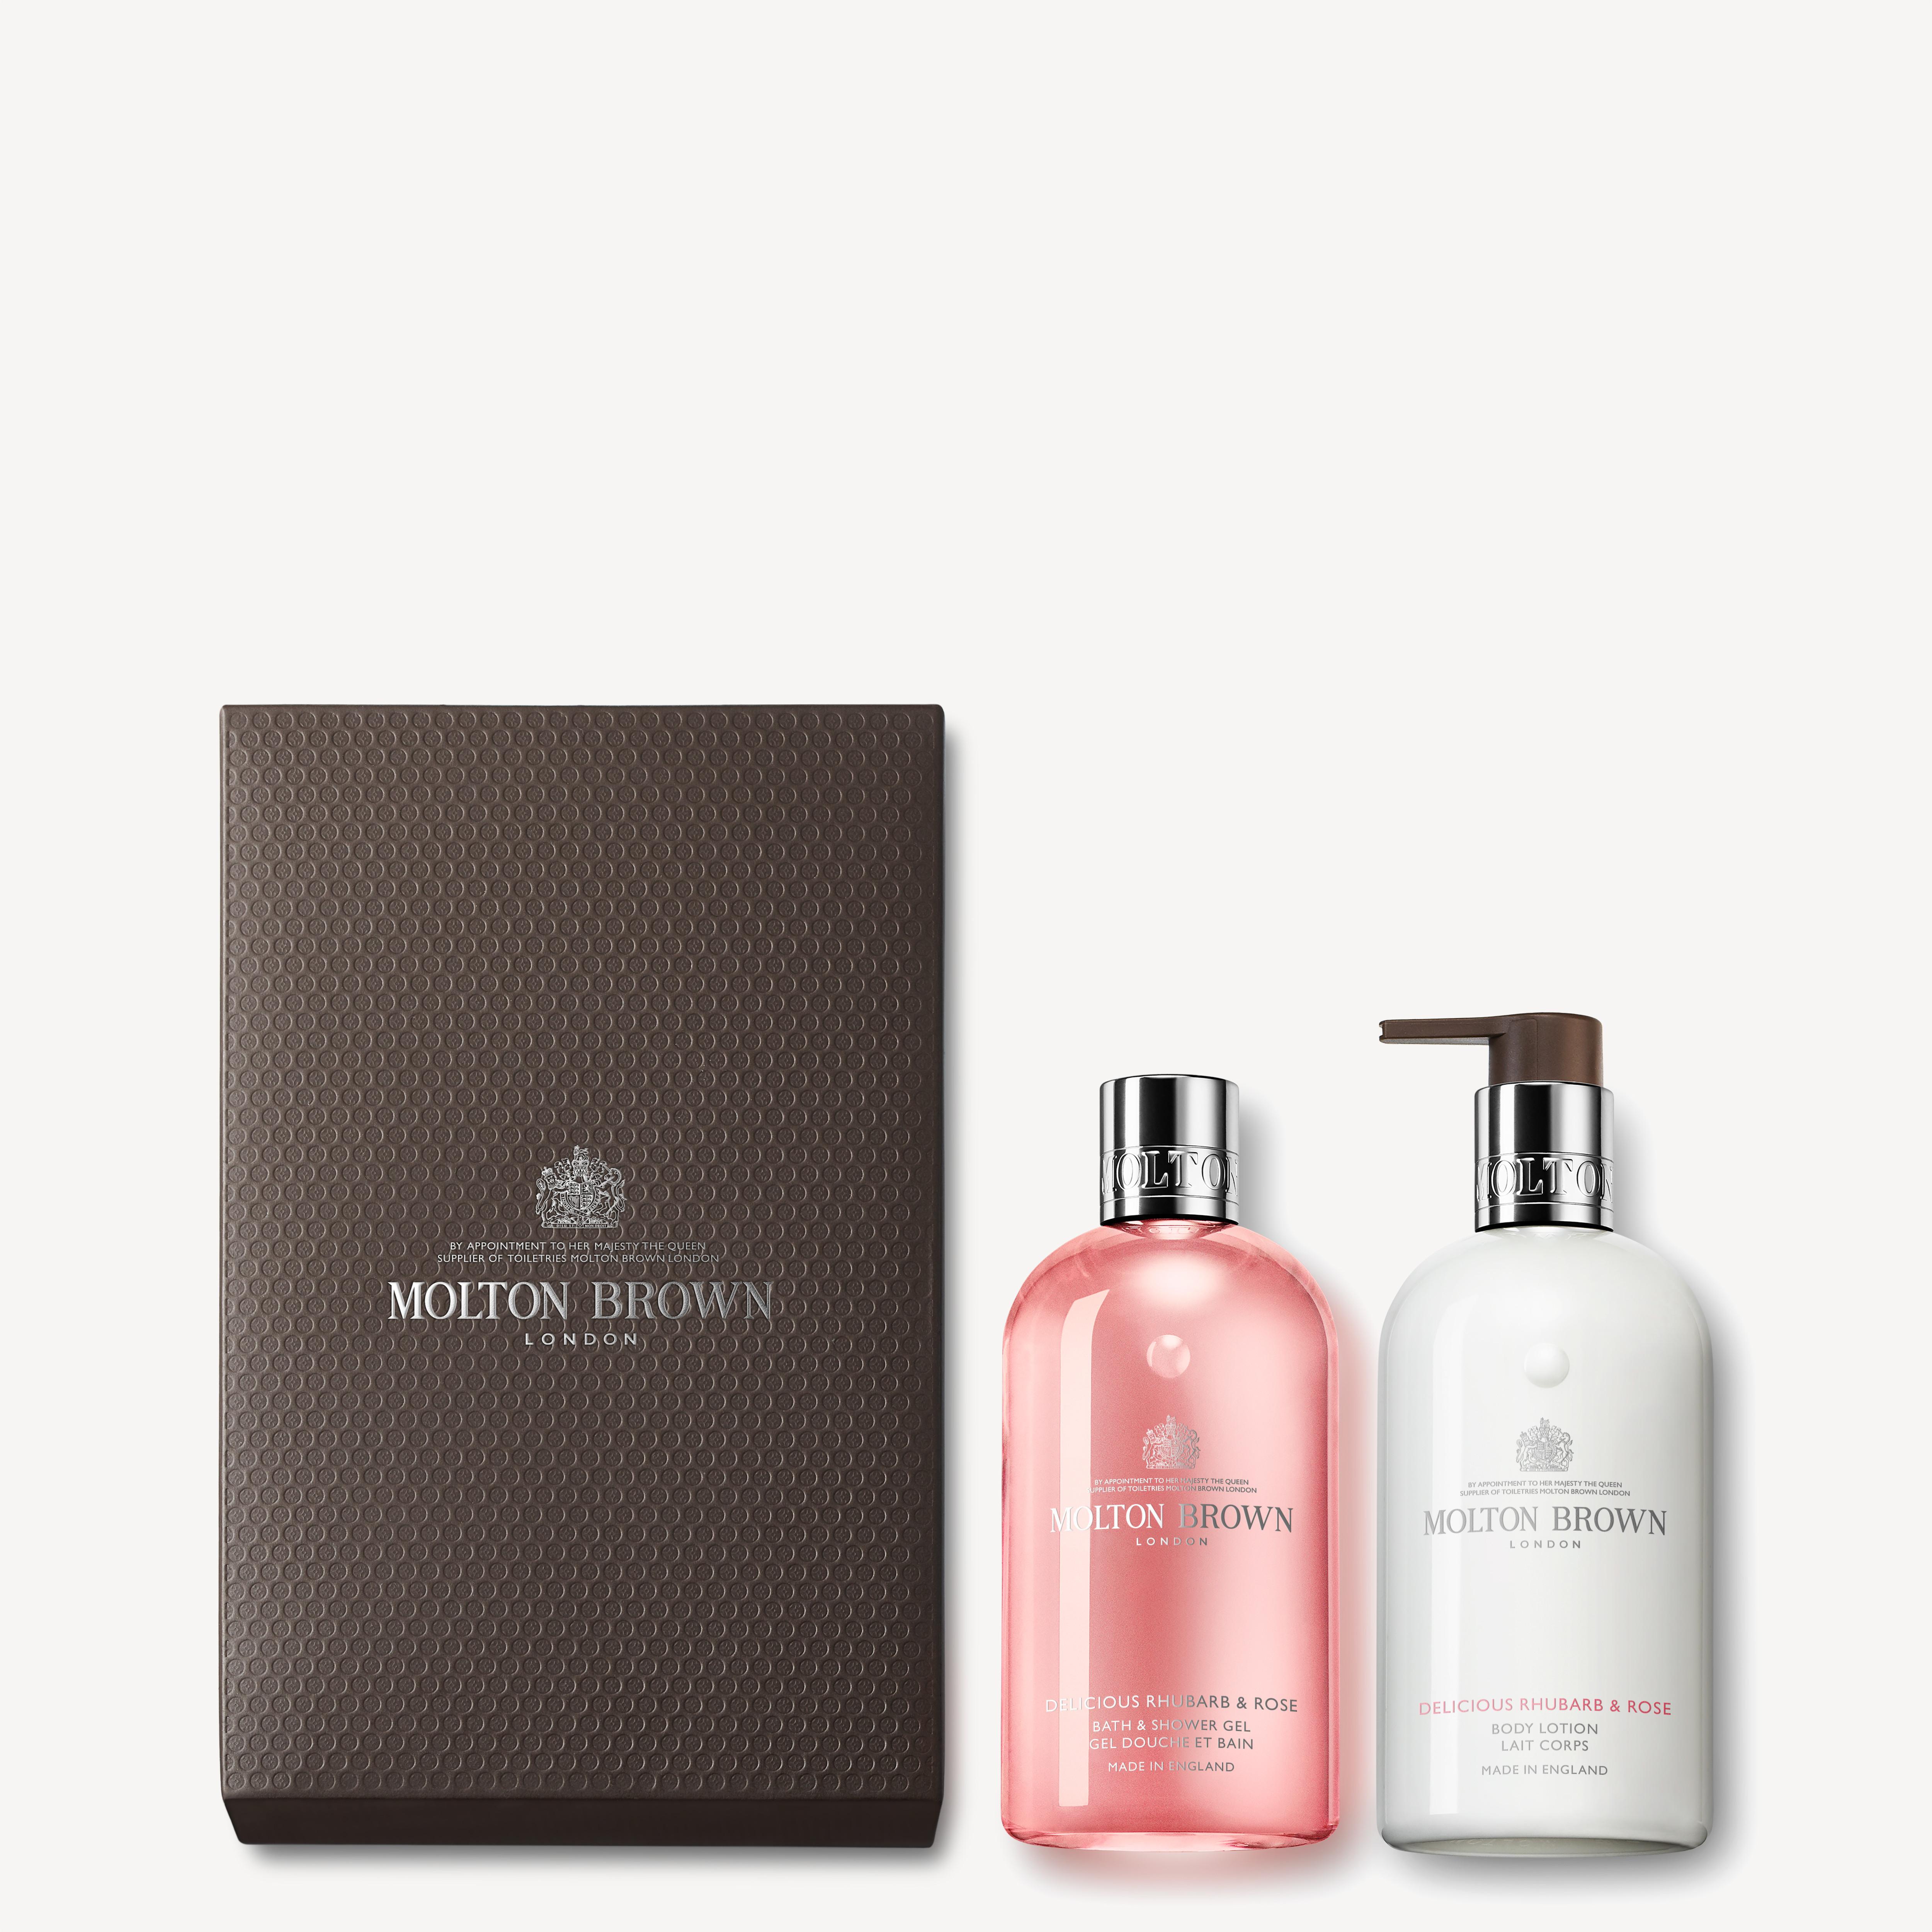 Molton Brown Delicious Rhubarb & Rose Shower Gel & Lotion Gift Set